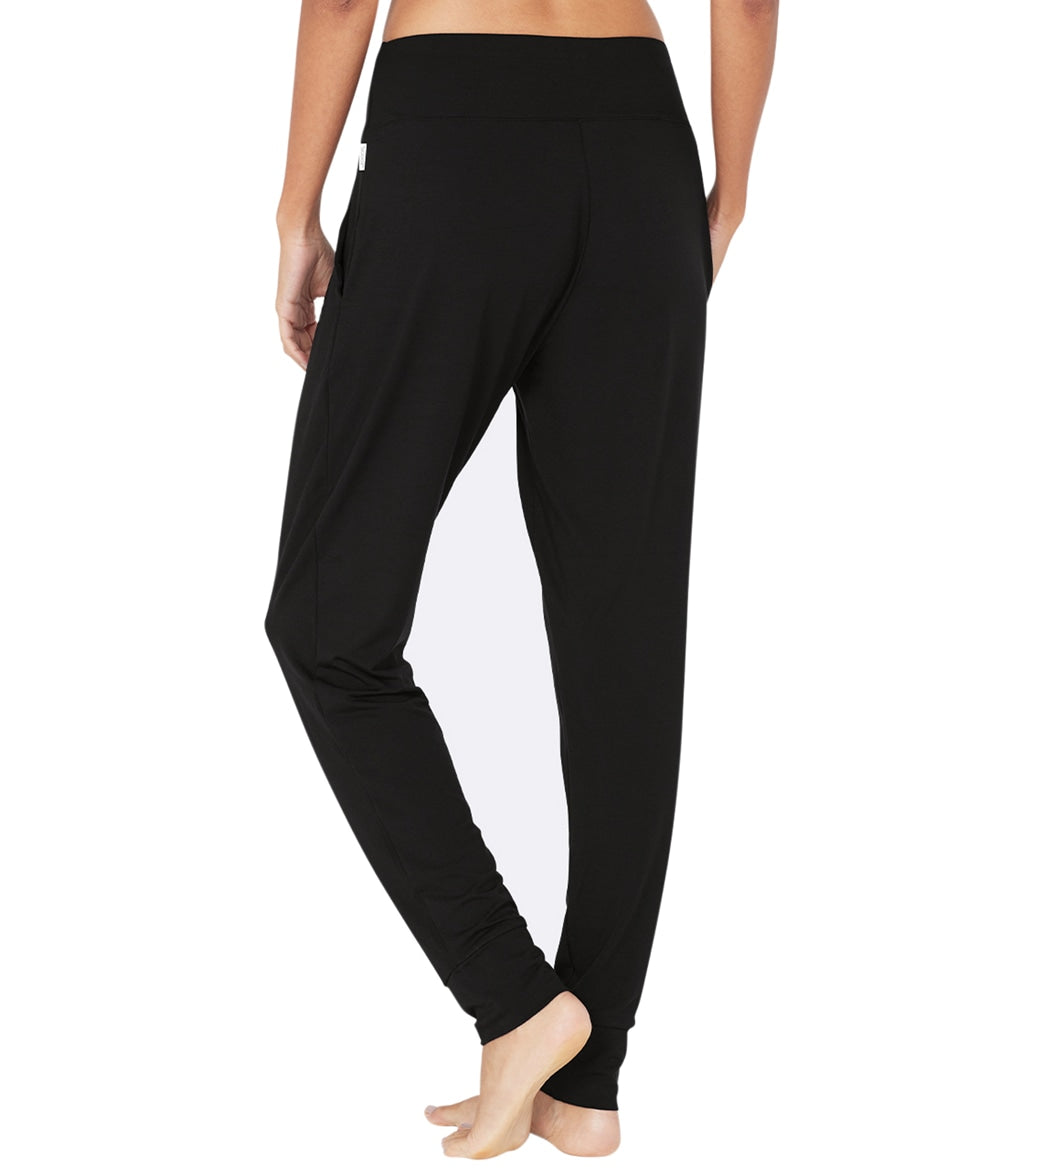 Downtime Lounge Pants, Storm